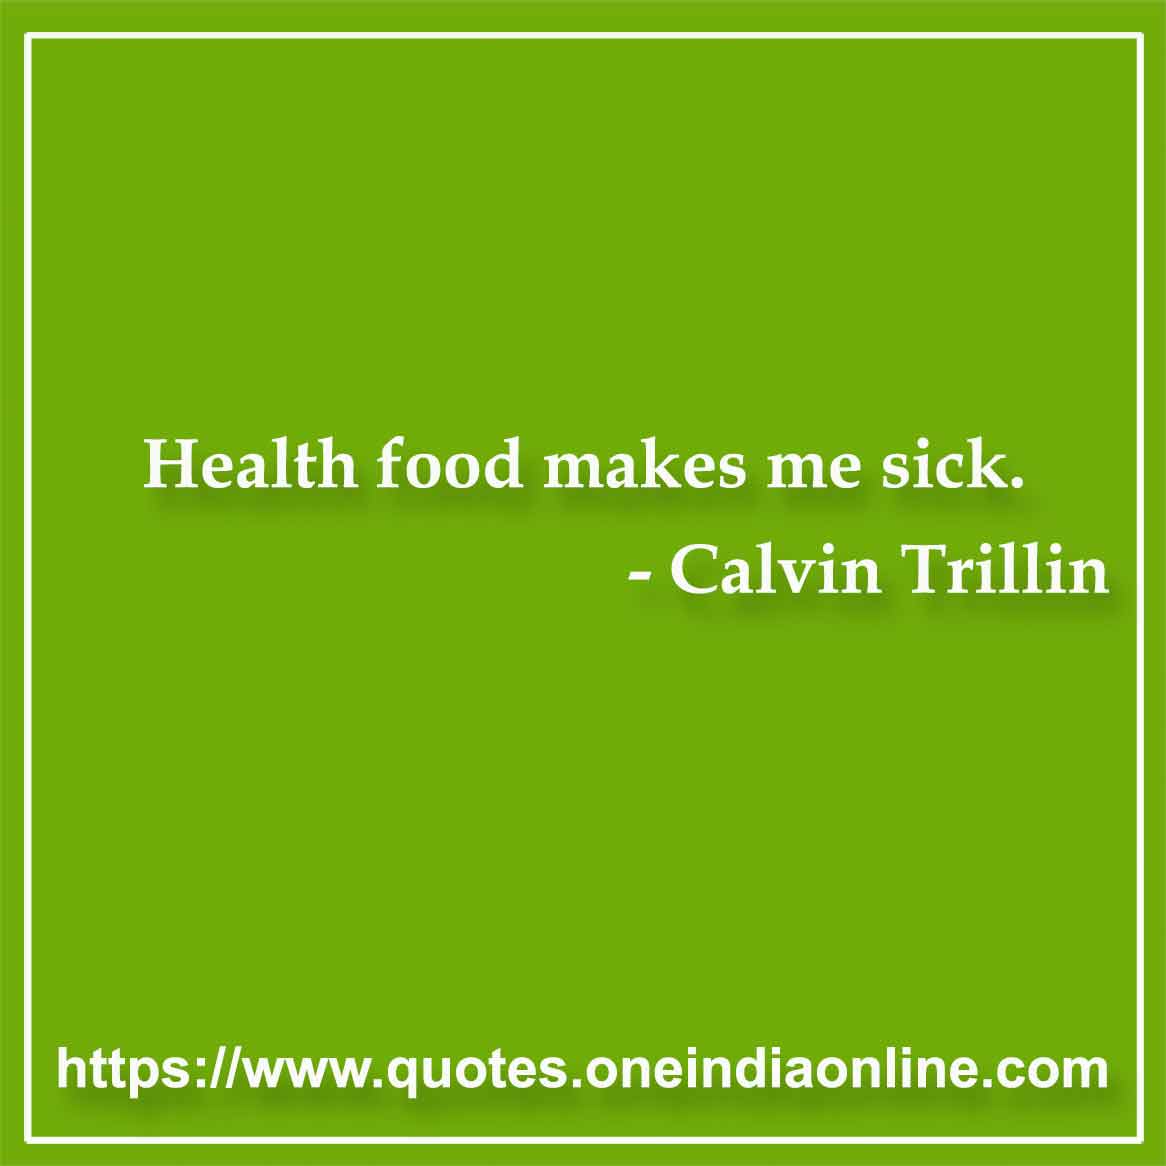 Health food makes me sick.

- Food Quotes by Calvin Trillin 